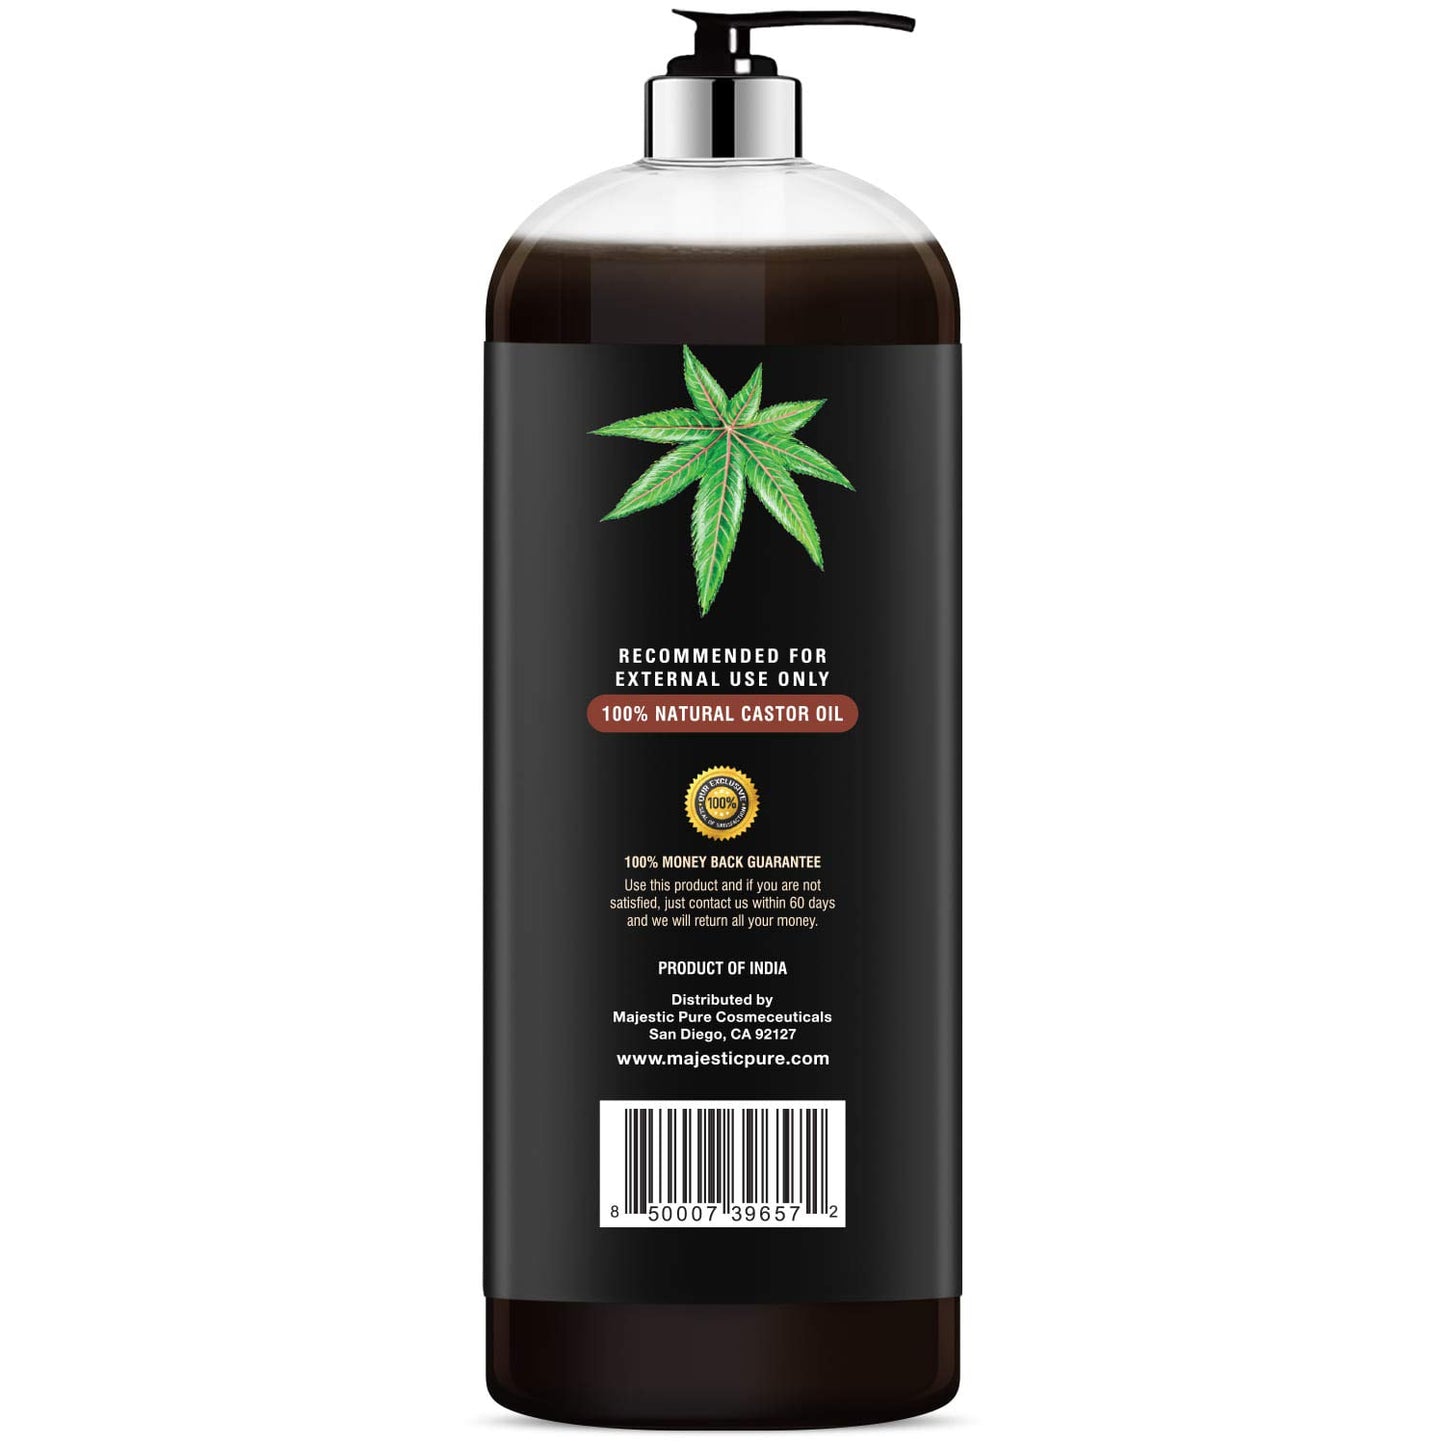 Majestic Pure Jamaican Black Castor Oil for Hair Growth & Natural Skin Care - Roasted & Cold-Pressed - Massage, Scalp, Hair and Nails - 16 fl oz